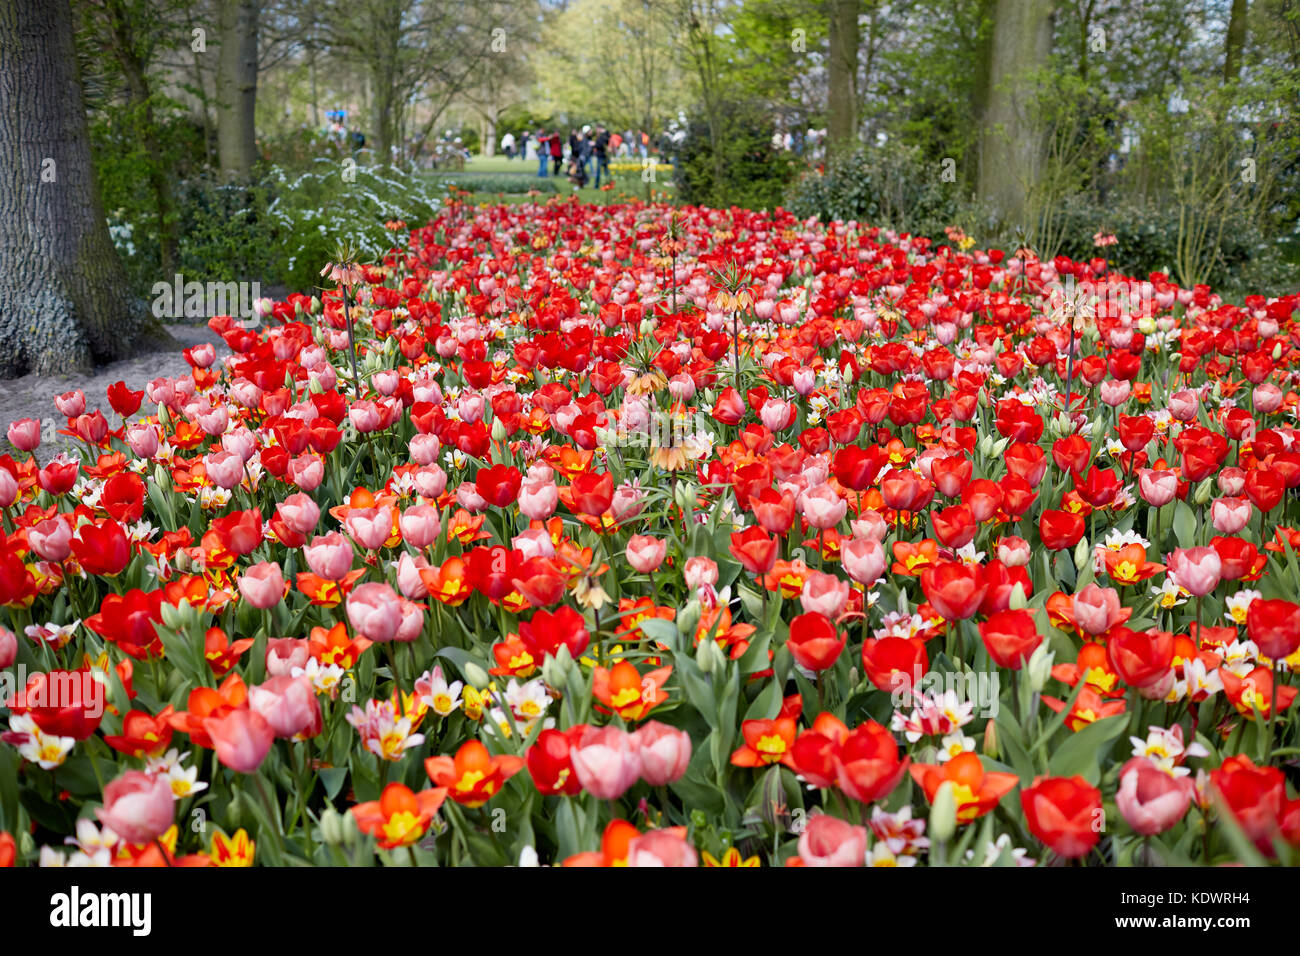 Keukenhof gardens in Holland, famed for its Spring displays of tulips, hyacinths and daffodils Stock Photo